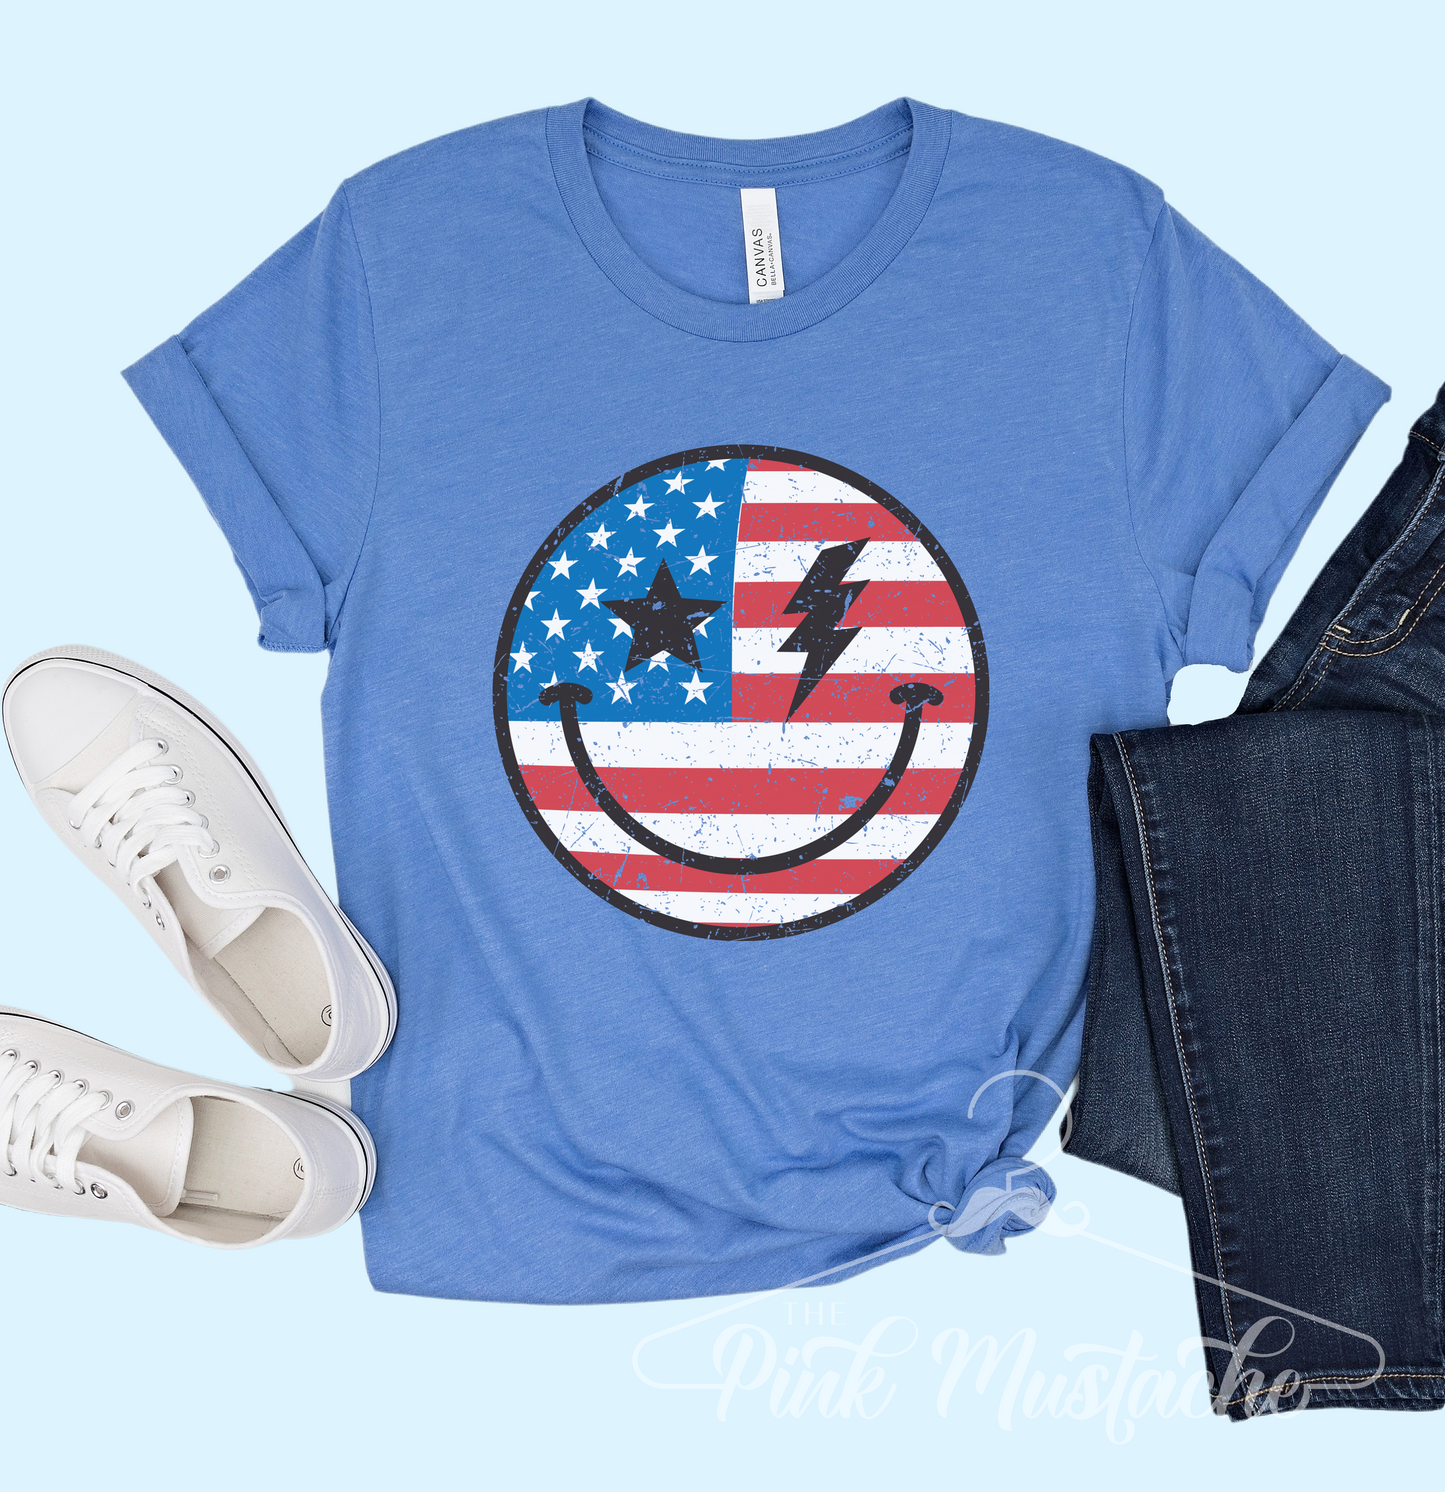 Soft Style USA Smiley Shirts / Patriotic Happy Tees Memorial Day July 4th / Retro Style/ Toddler - Youth - Adult Sizing